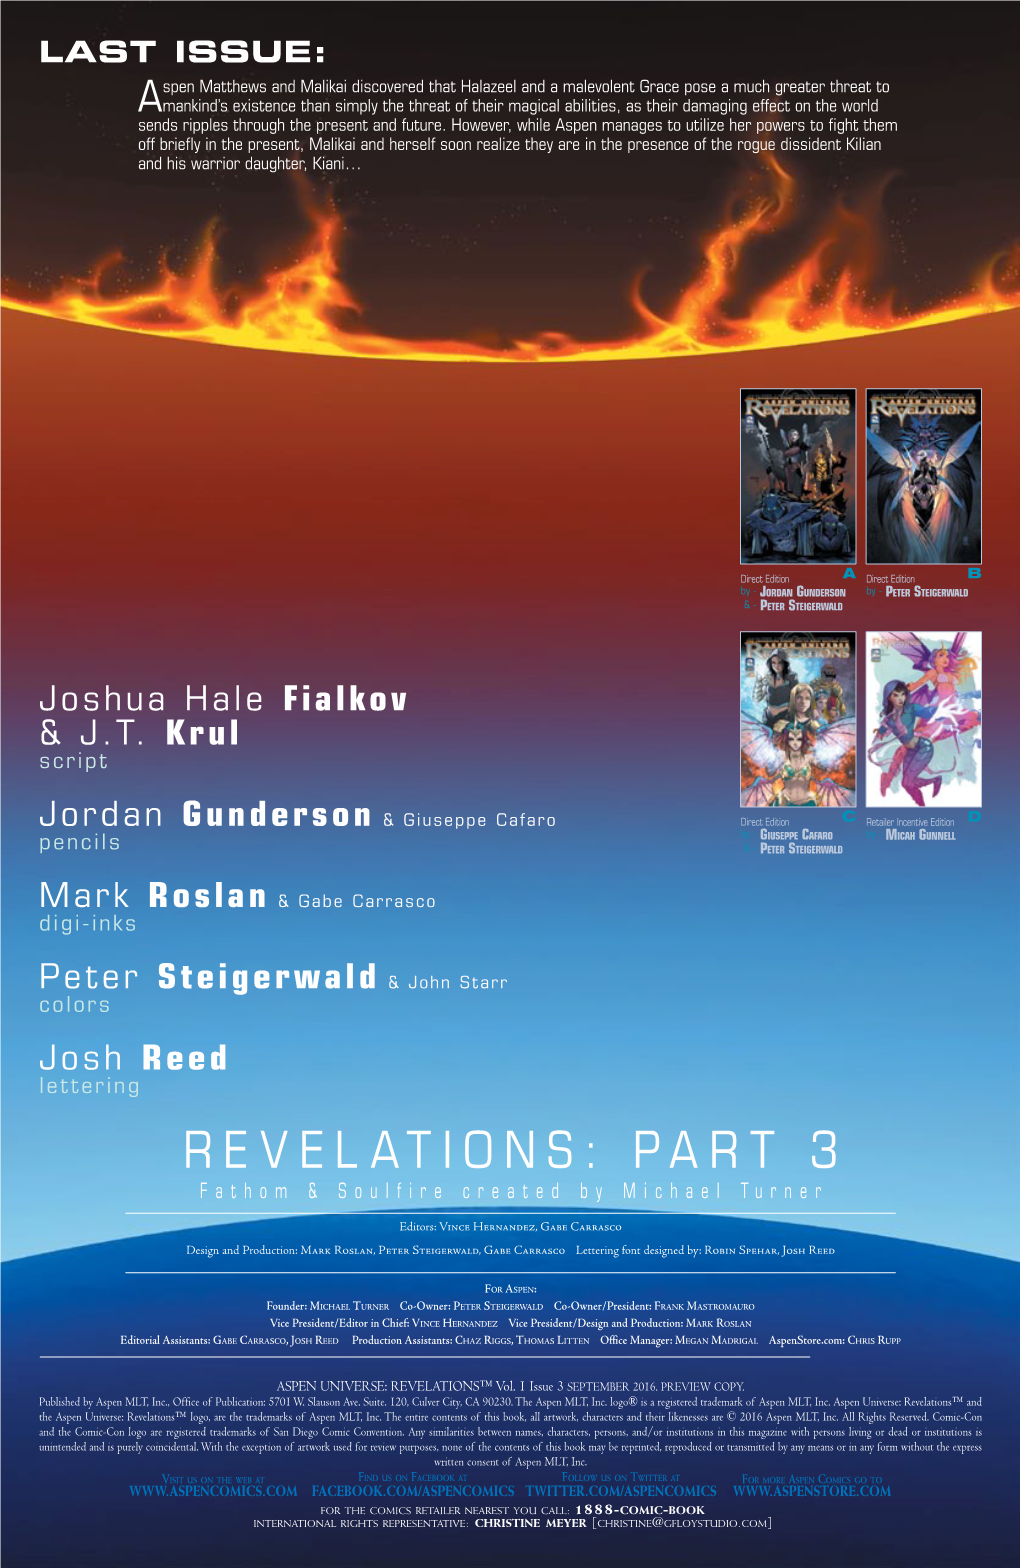 REVELATIONS: PART 3 Fathom & Soulfire Created by Michael Turner